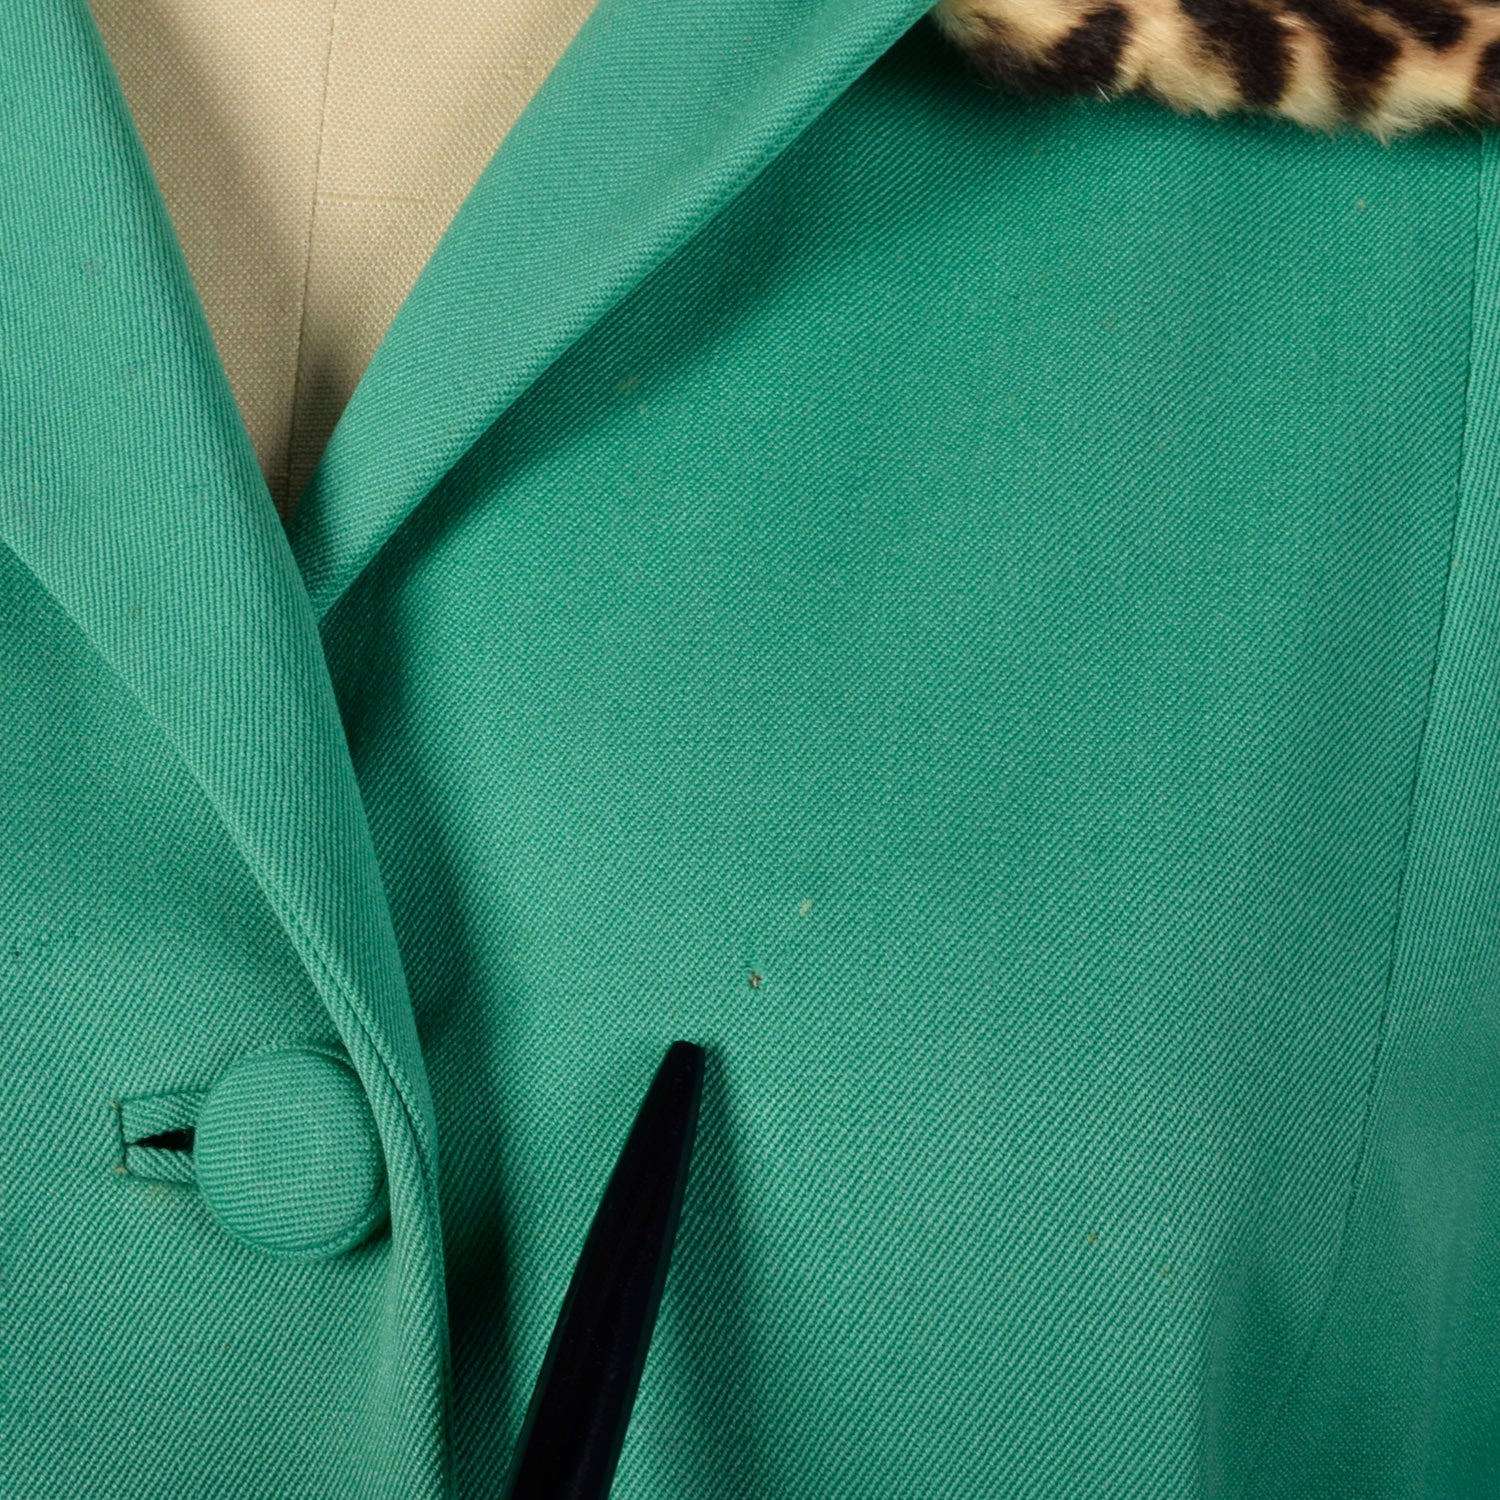 Medium 1950s Green Skirt Suit with Faux Leopard Collar